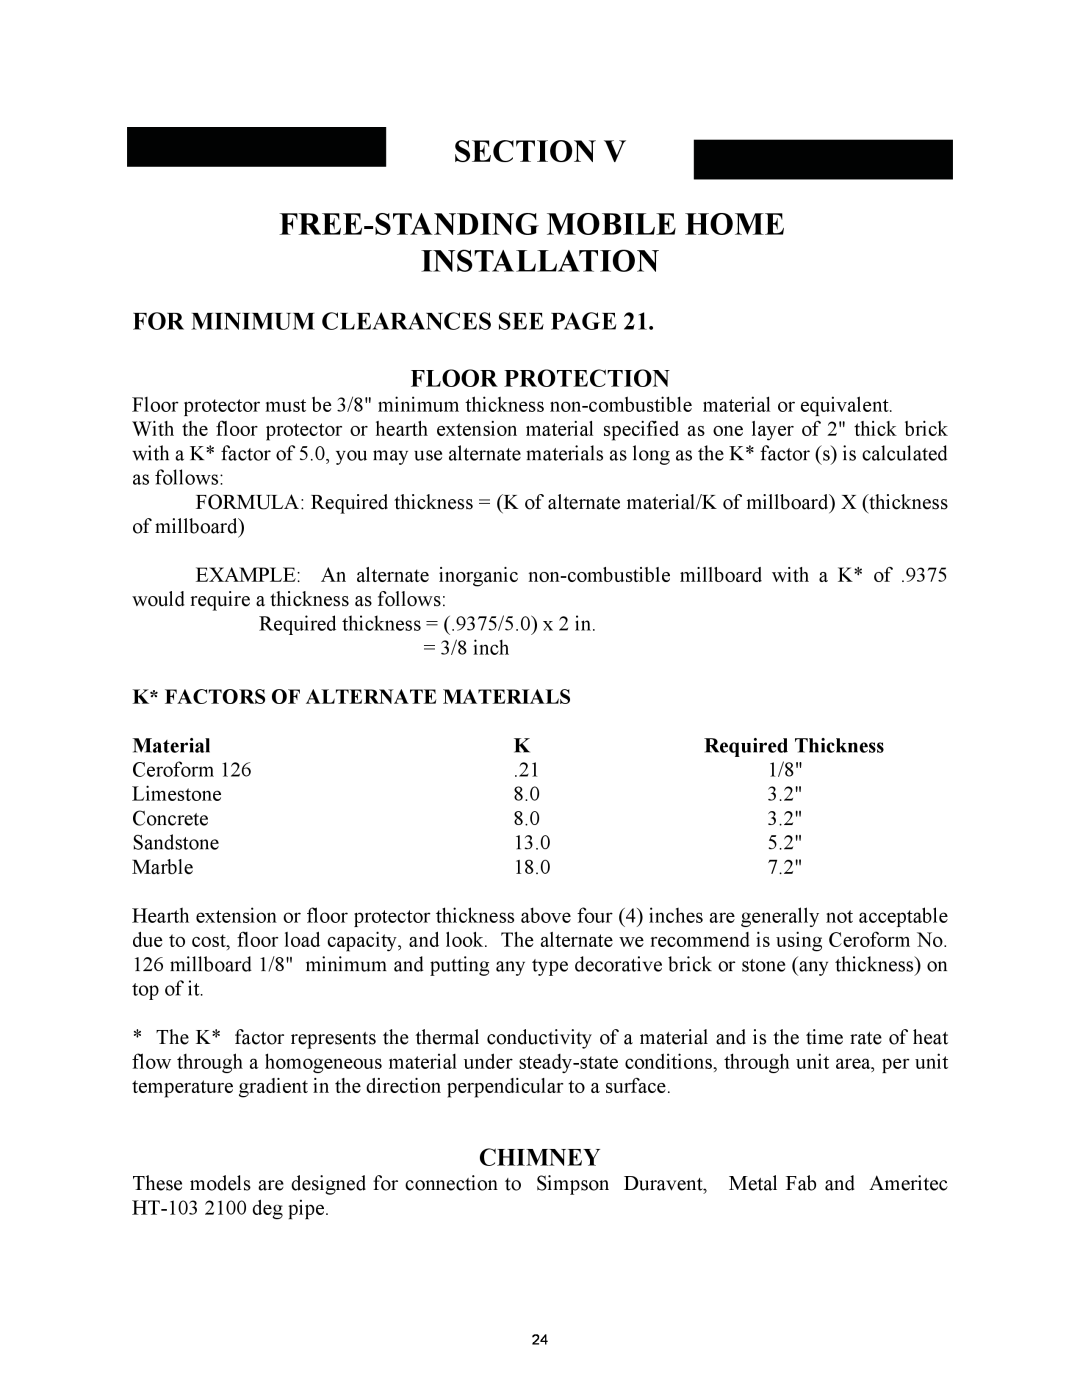 New Buck Corporation 85 Free-Standingmobile Home Installation, For Minimum Clearances See Page Floor Protection, Chimney 